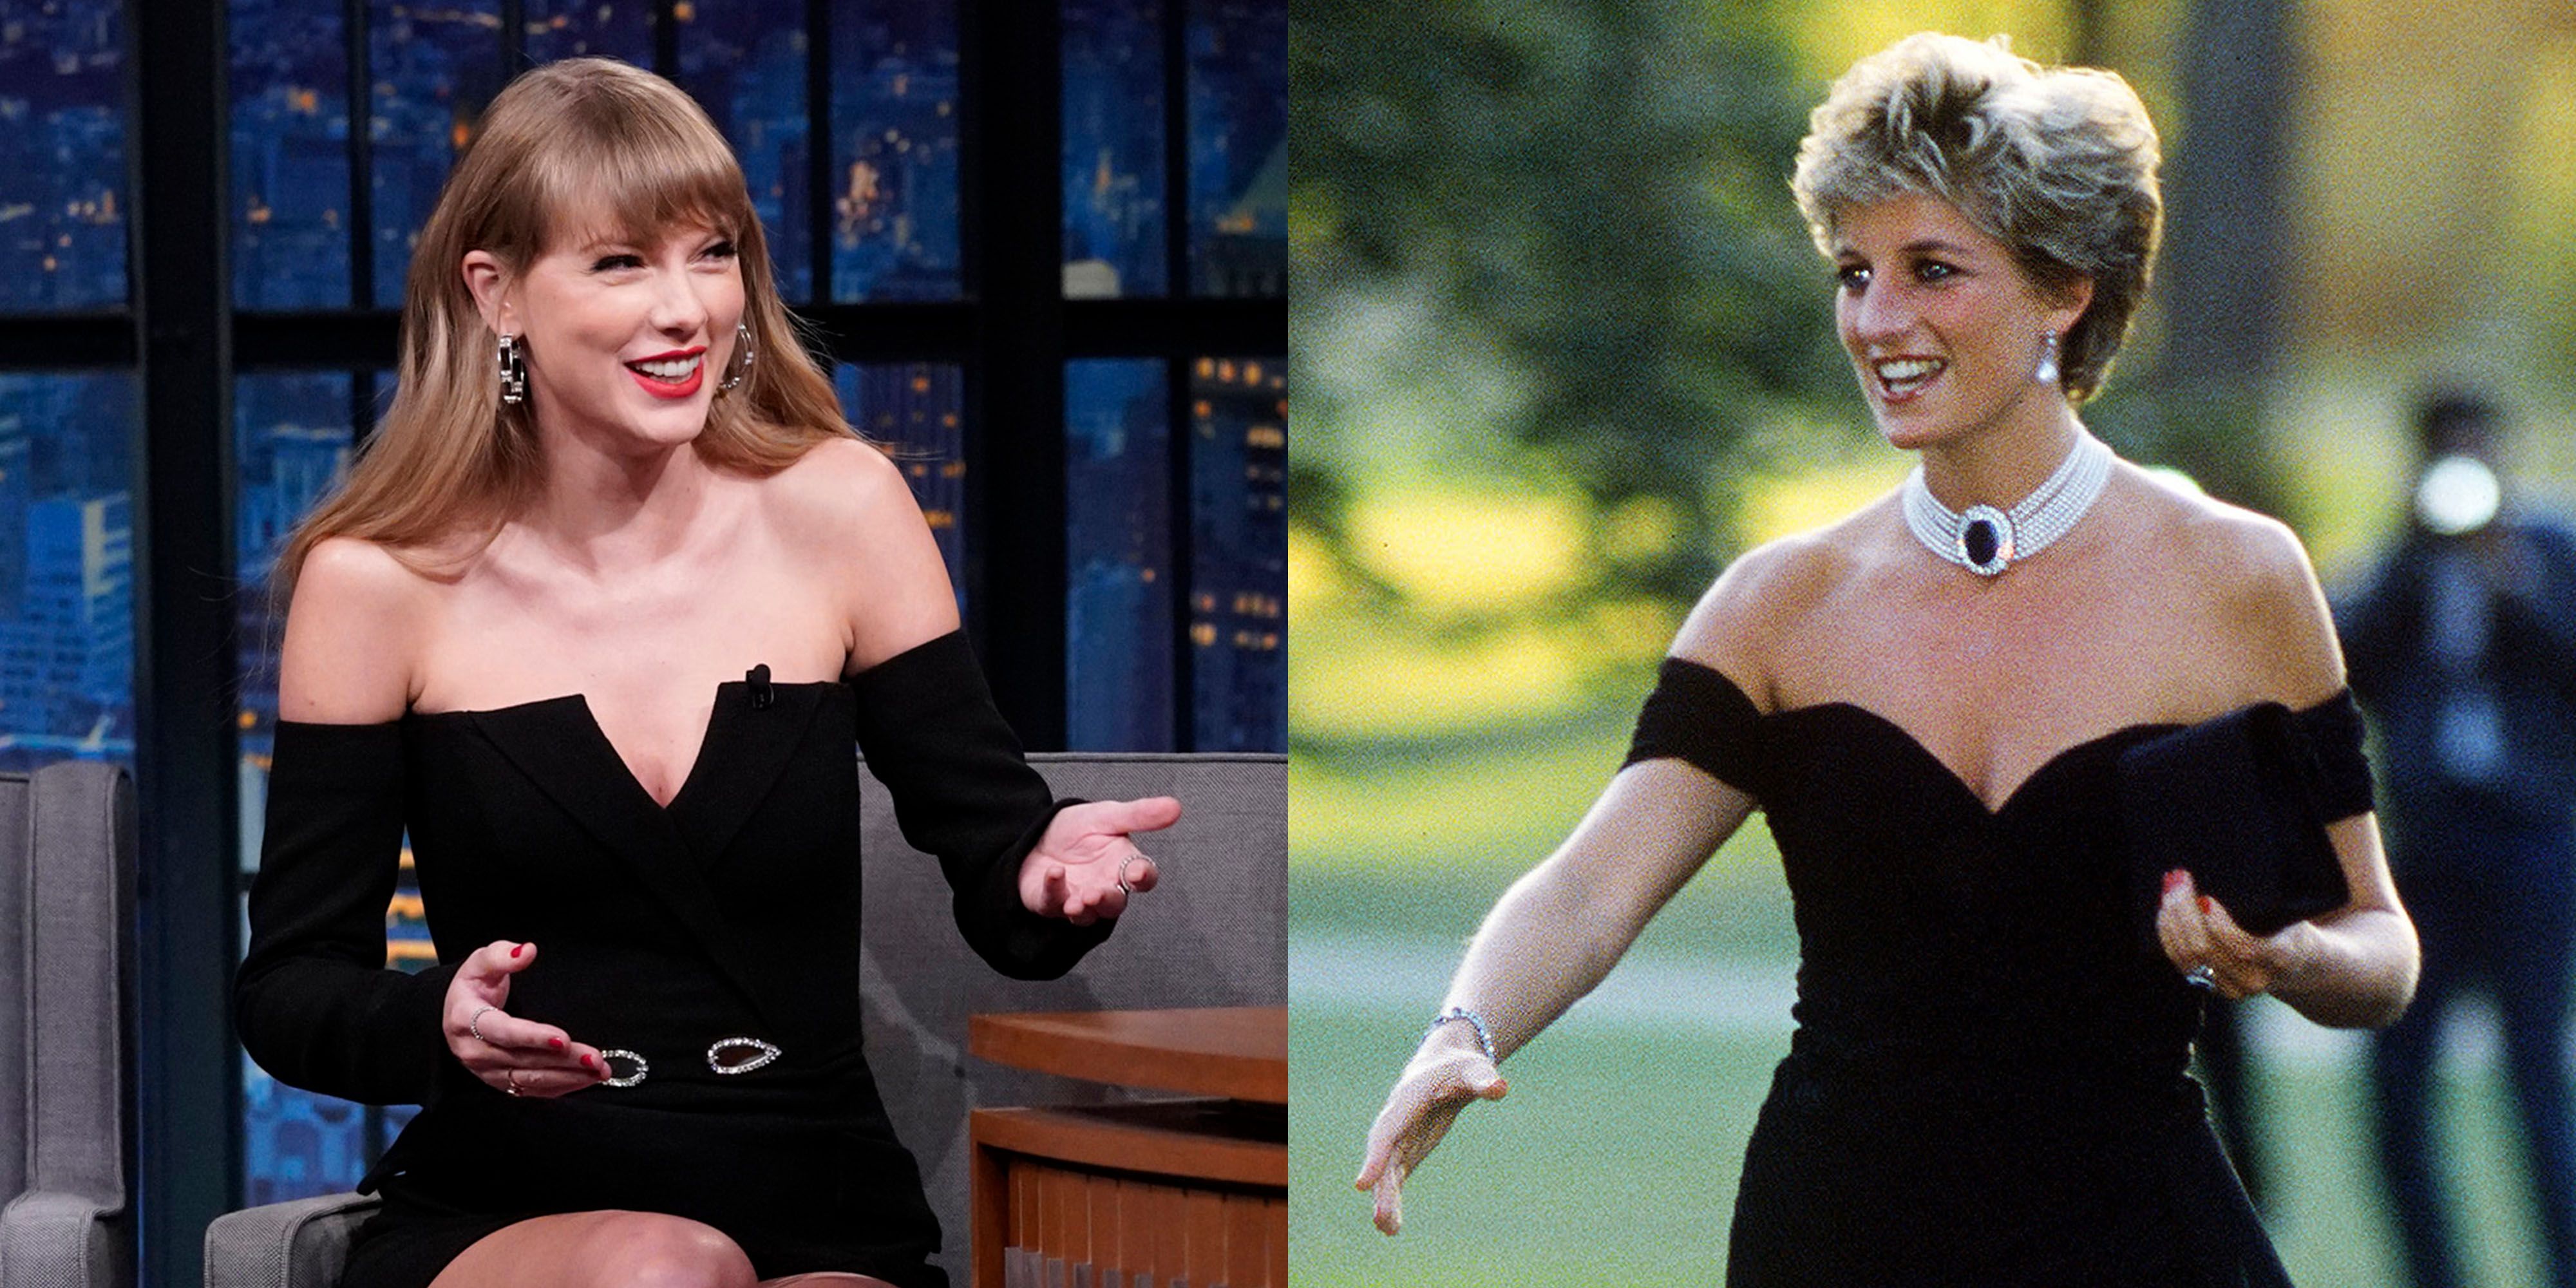 Taylor Swift's Latest Look Fuses Princess Diana With '90s Dad Fashion